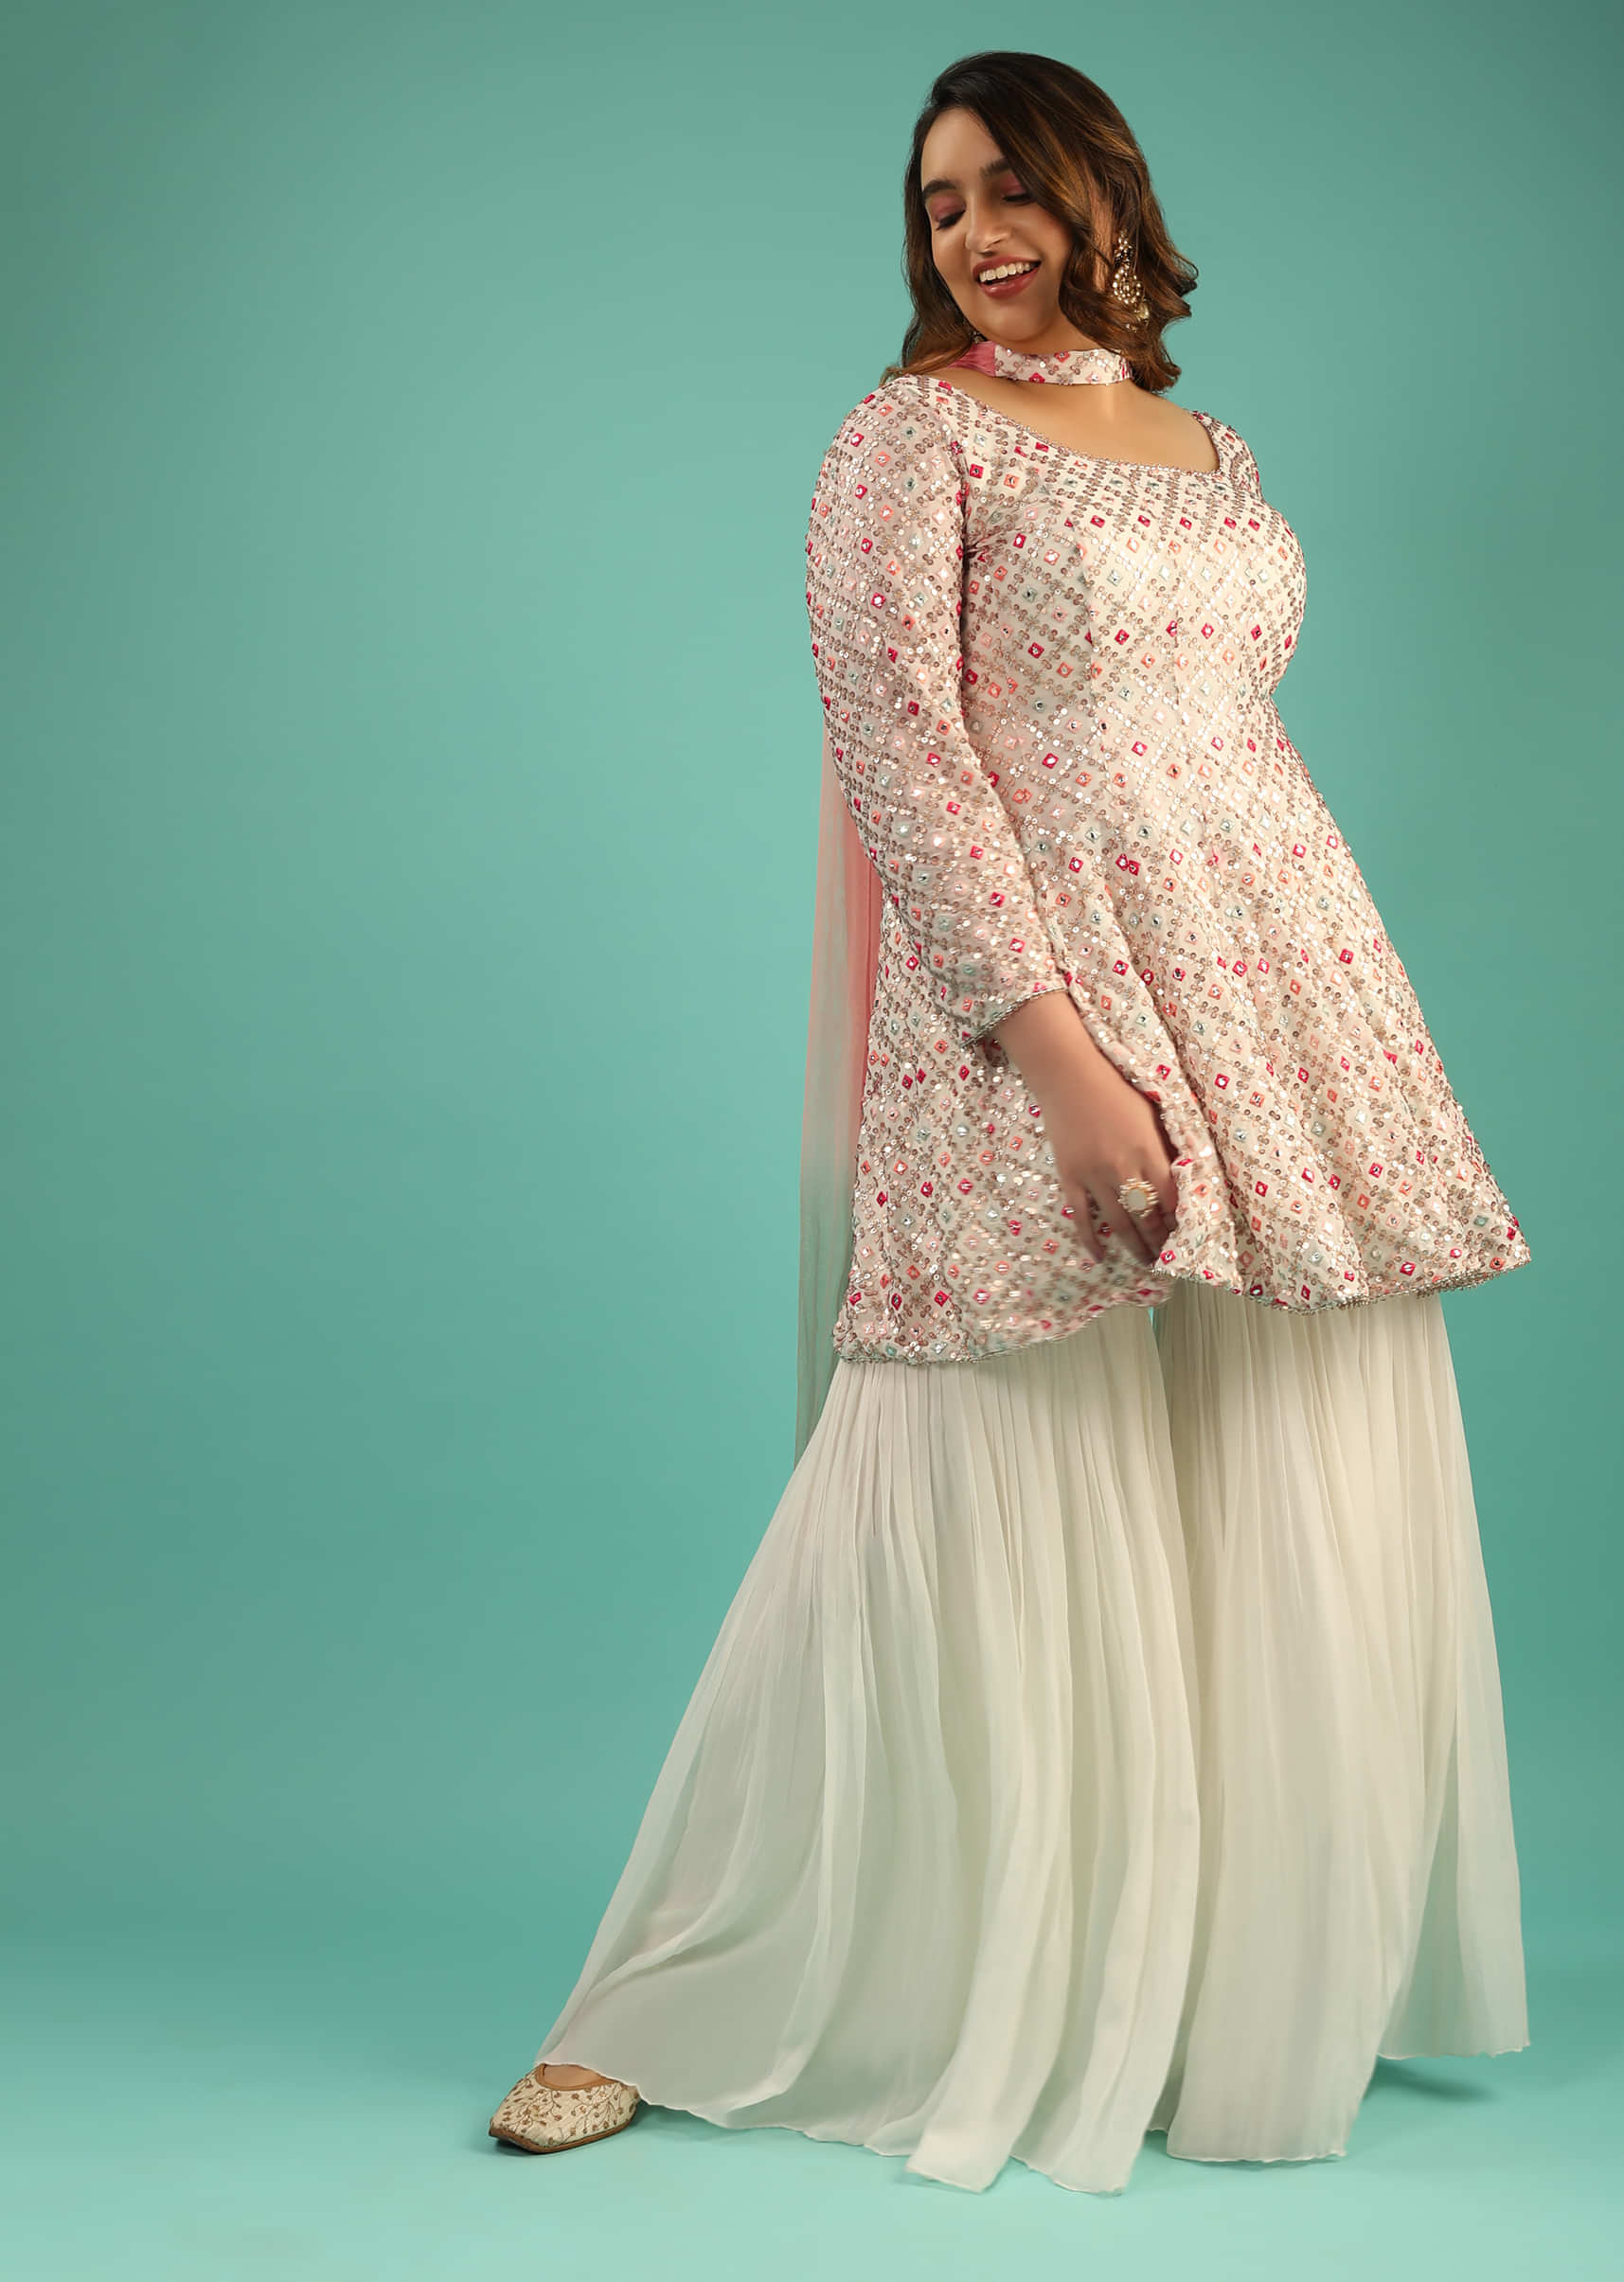 Off White Sharara Suit In Georgette With Peplum Kurti Adorned In Colorful Resham And Mirror Abla Jaal  